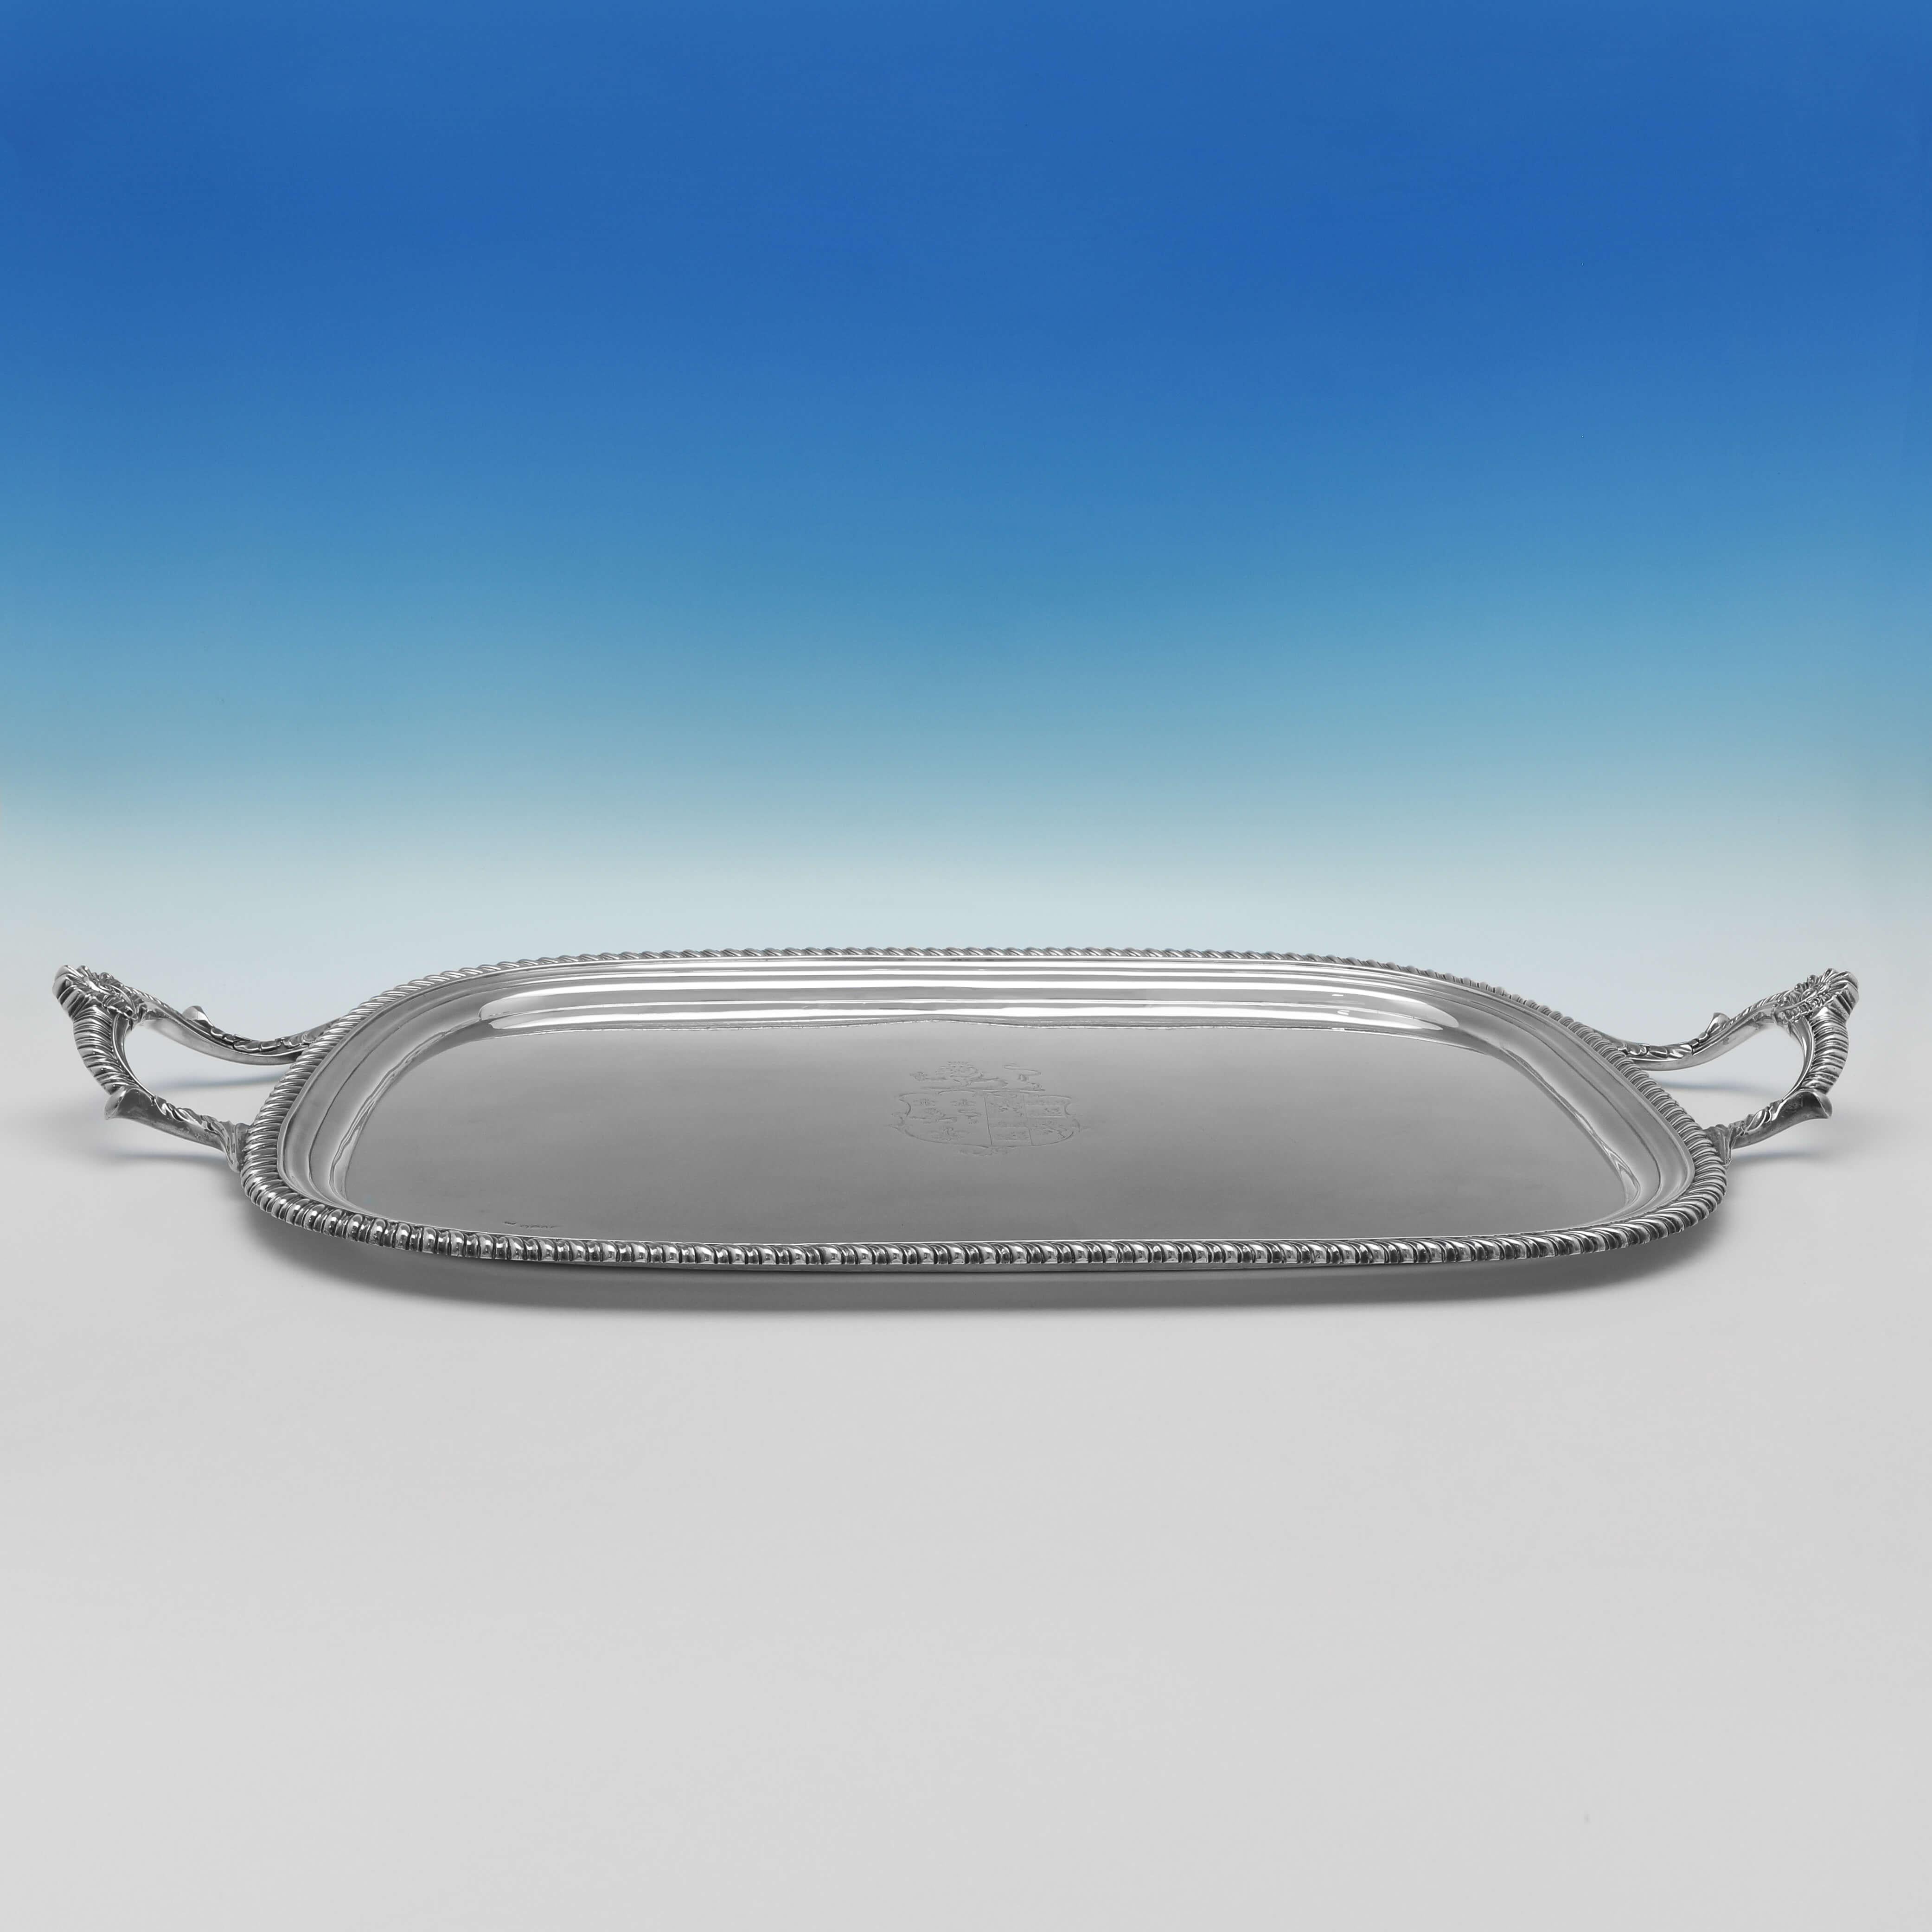 Hallmarked in London in 1814 by William Bennett, this large, Regency Period, Antique Sterling Silver Tray, features a gadroon border, shell and gadroon detailed handles, and an engraved coat of arms to the centre. The tray measures 32